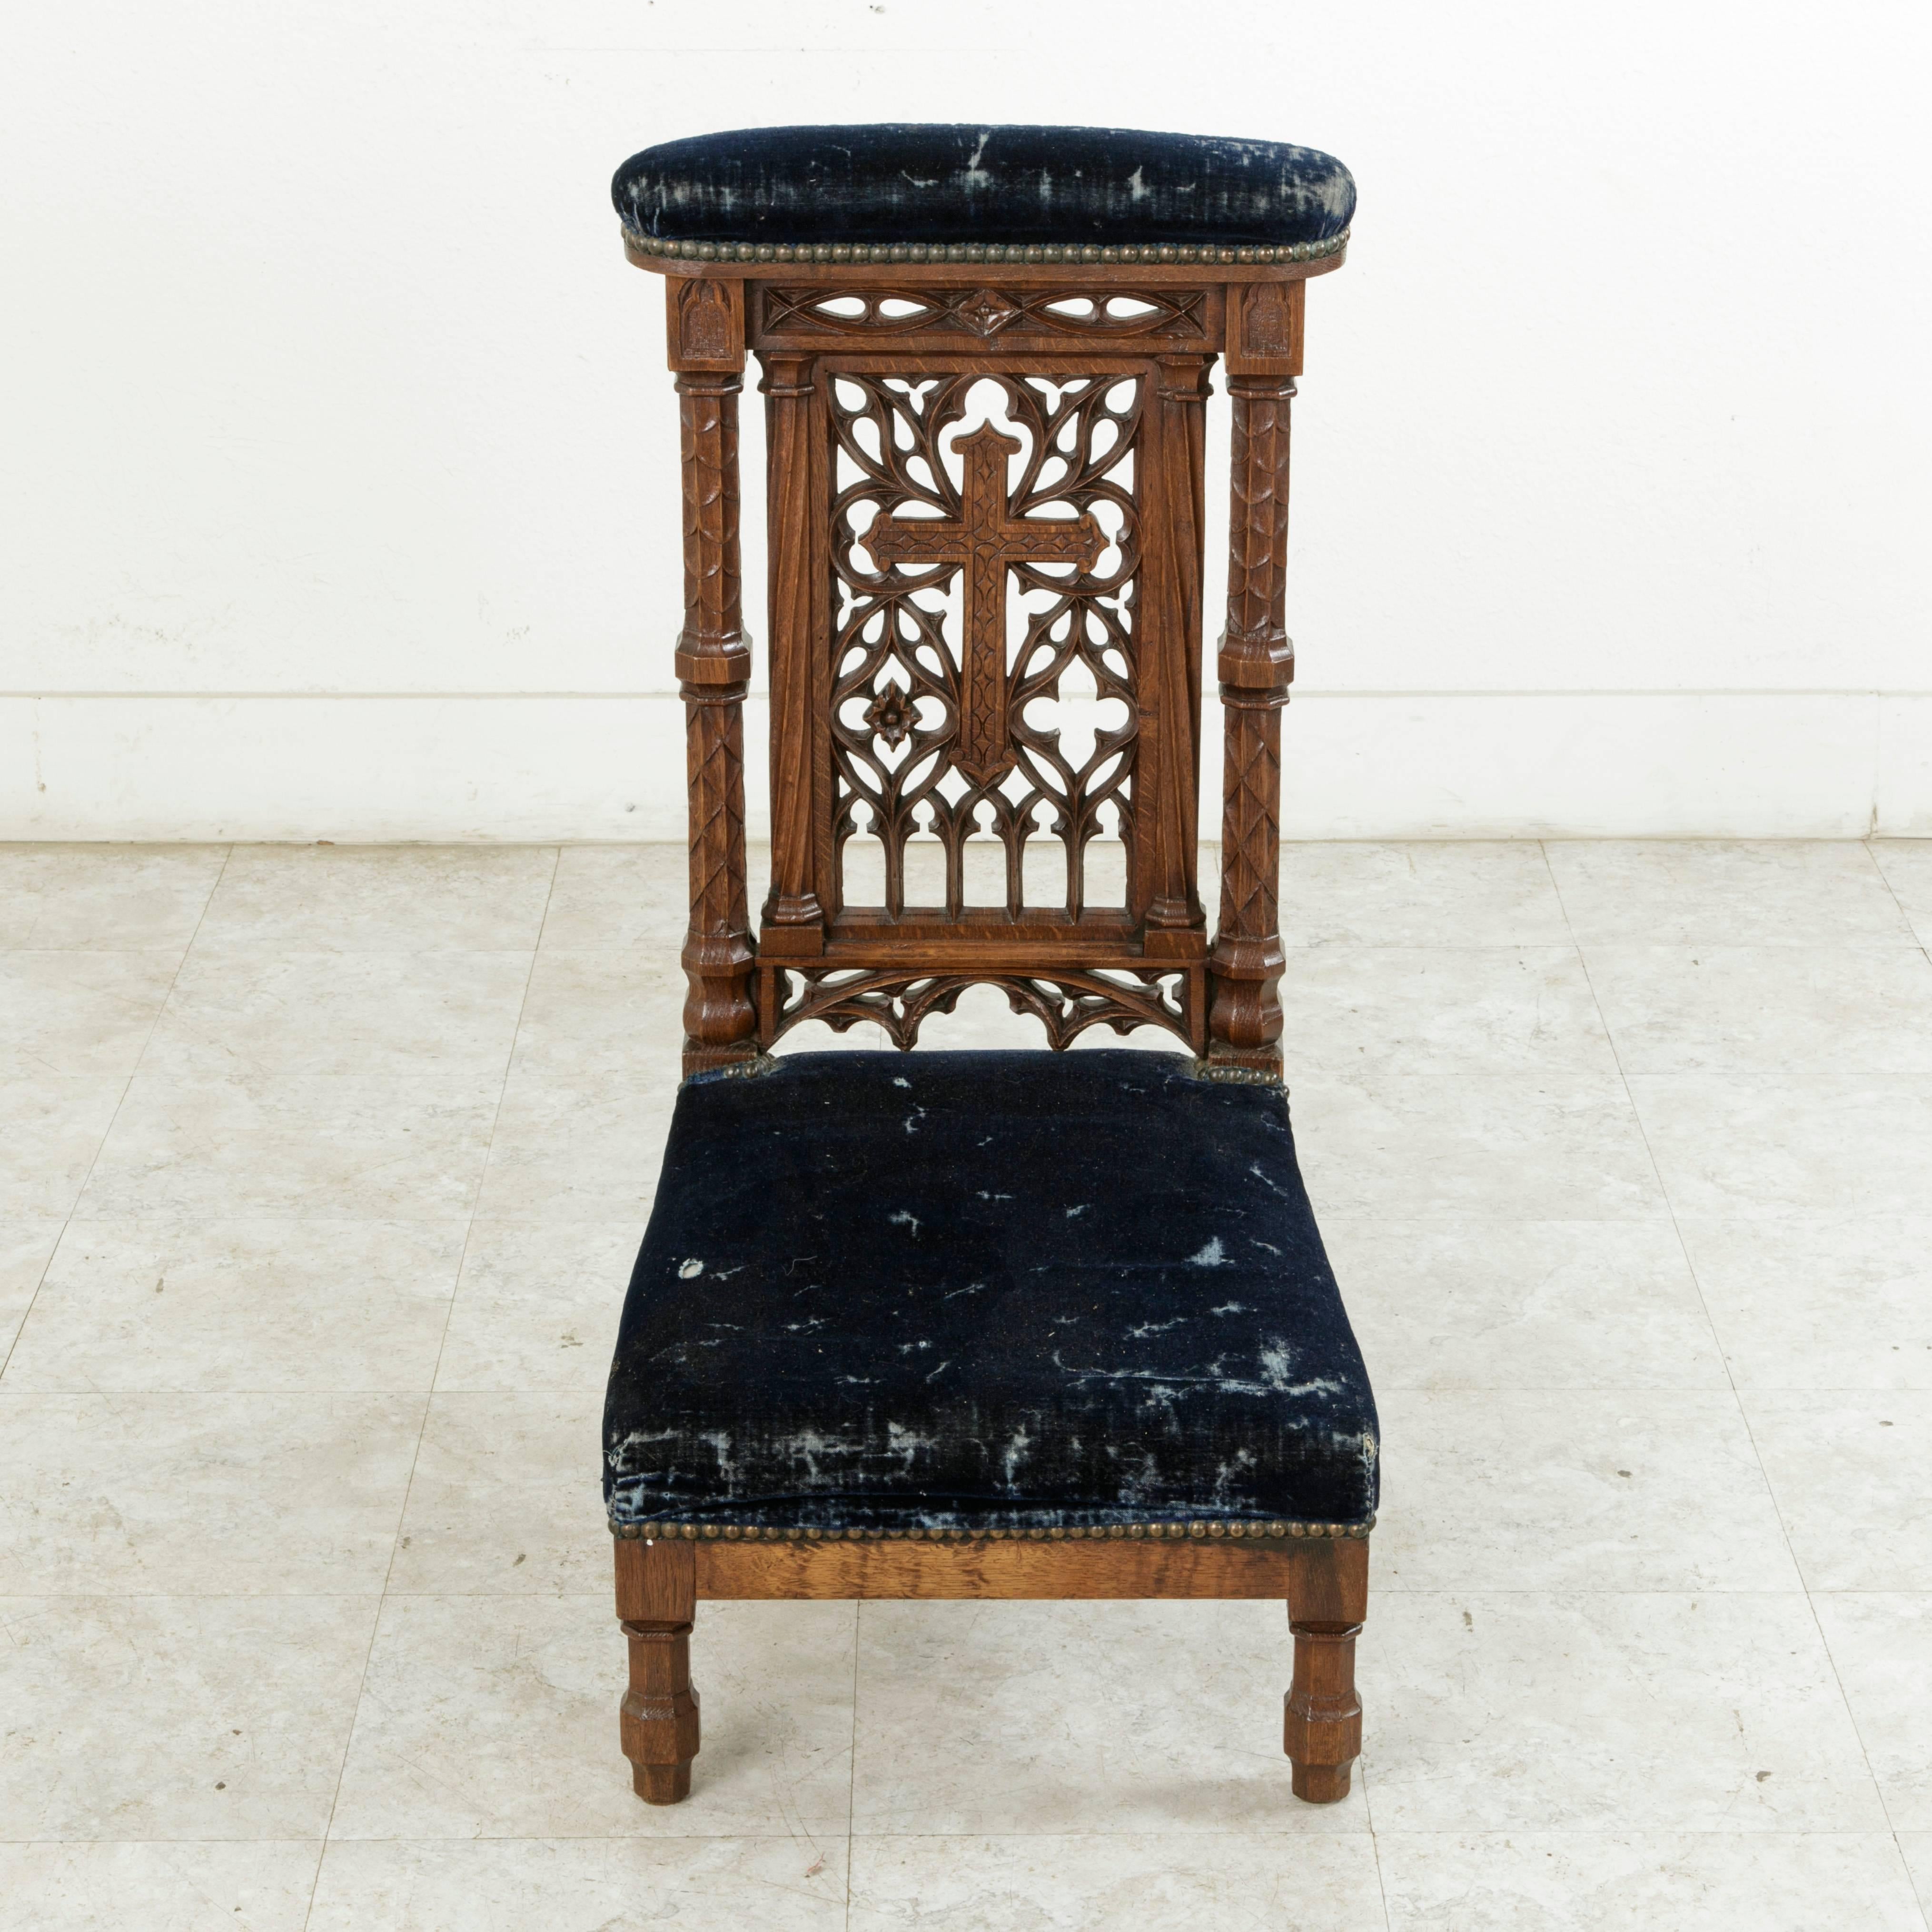 This late 19th century French oak prayer chair, or prie-dieu in French, features delicately hand-carved Gothic elements and a central cross flanked by twisted fluted columns. Two additional columns at the sides are decorated with stylized water